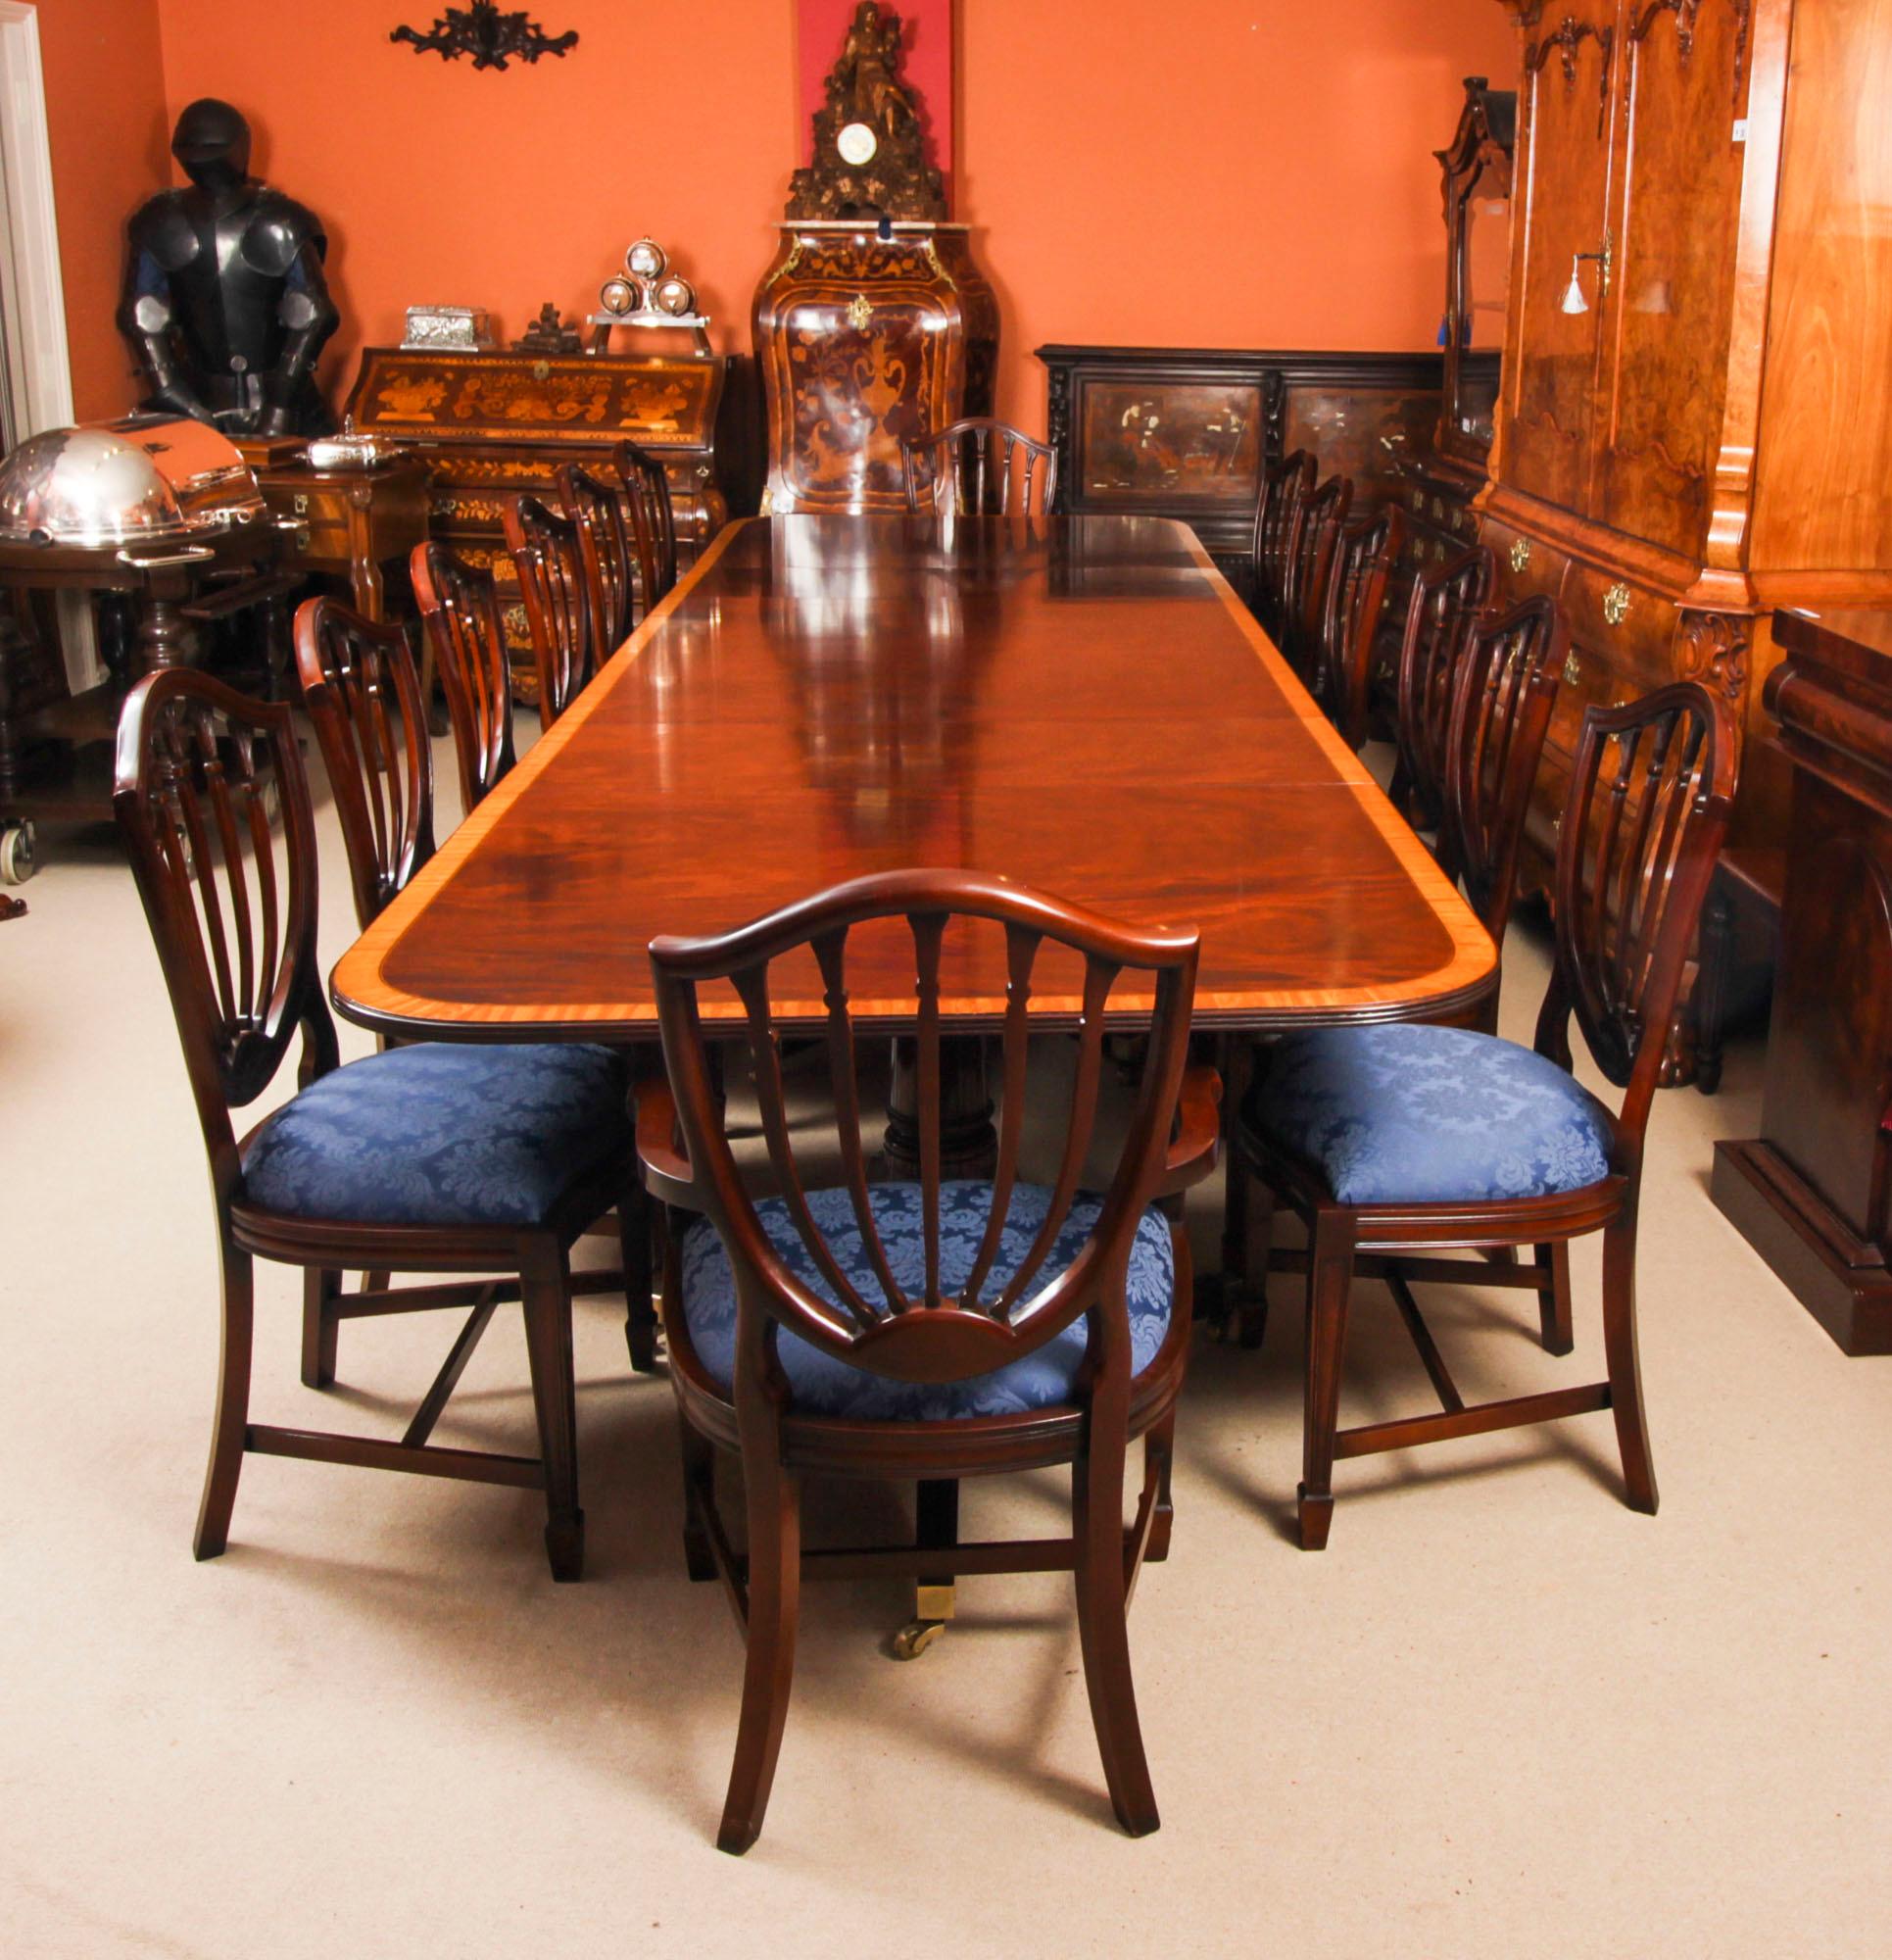 This is a superb dining set comprising a 13ft Vintage Regency Revival dining table  with fourteen Hepplewhite revival dining chairs., dating from the second half of the 20th Century.

The tabletop was crafted in flame mahogany and features superb